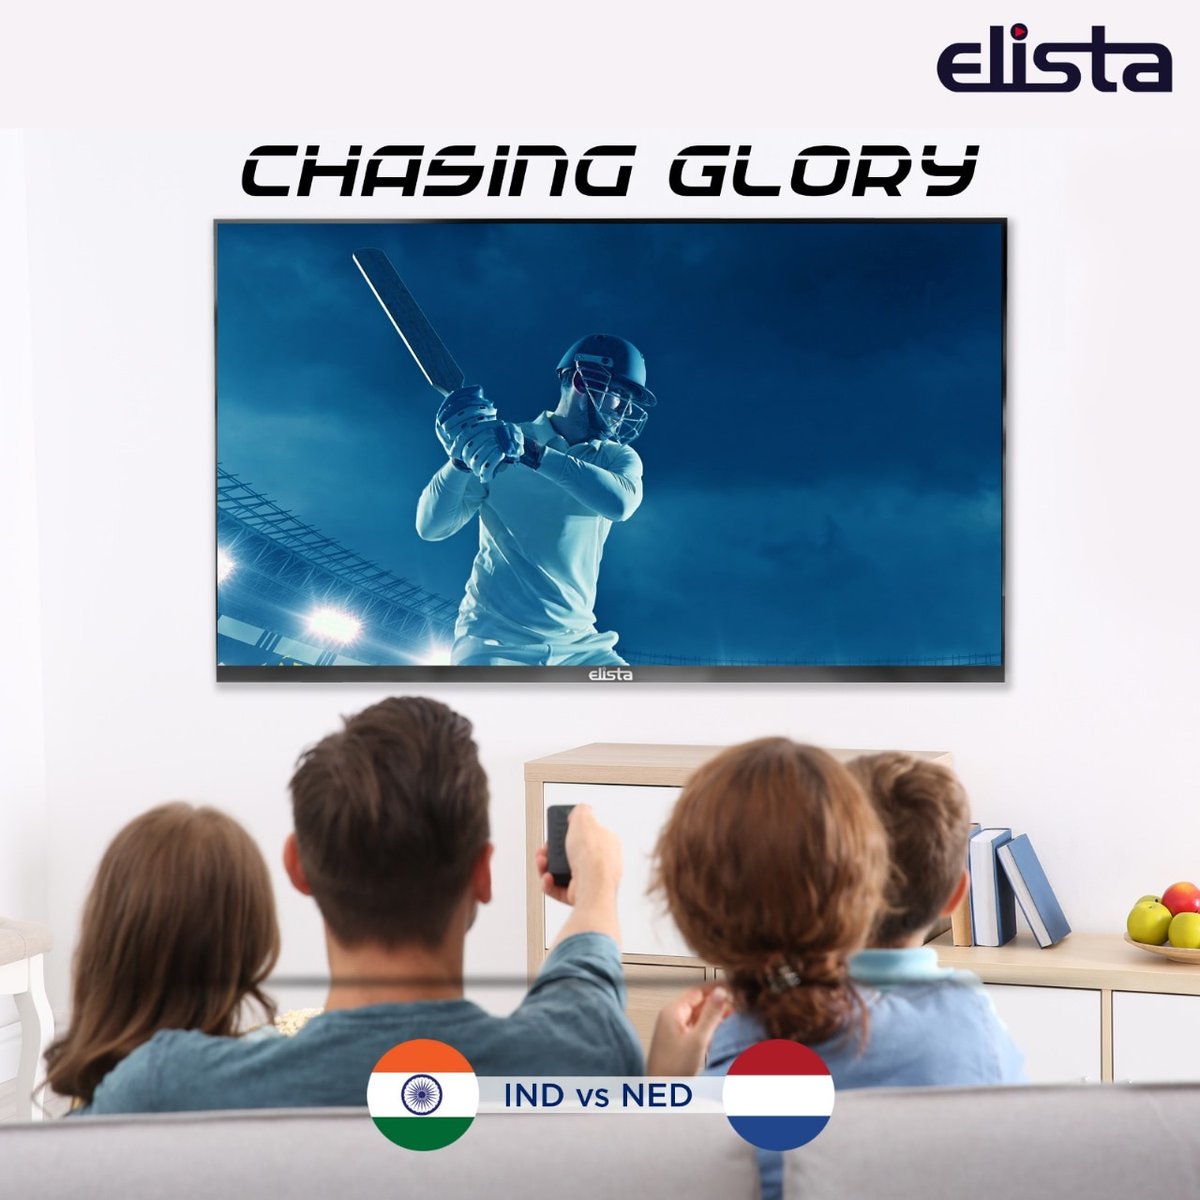 Hunting for Glory on the Cricket Battlefield 🔥🏏💥
Click here to check our smart range of SmartTV: amzn.to/3FkQce5